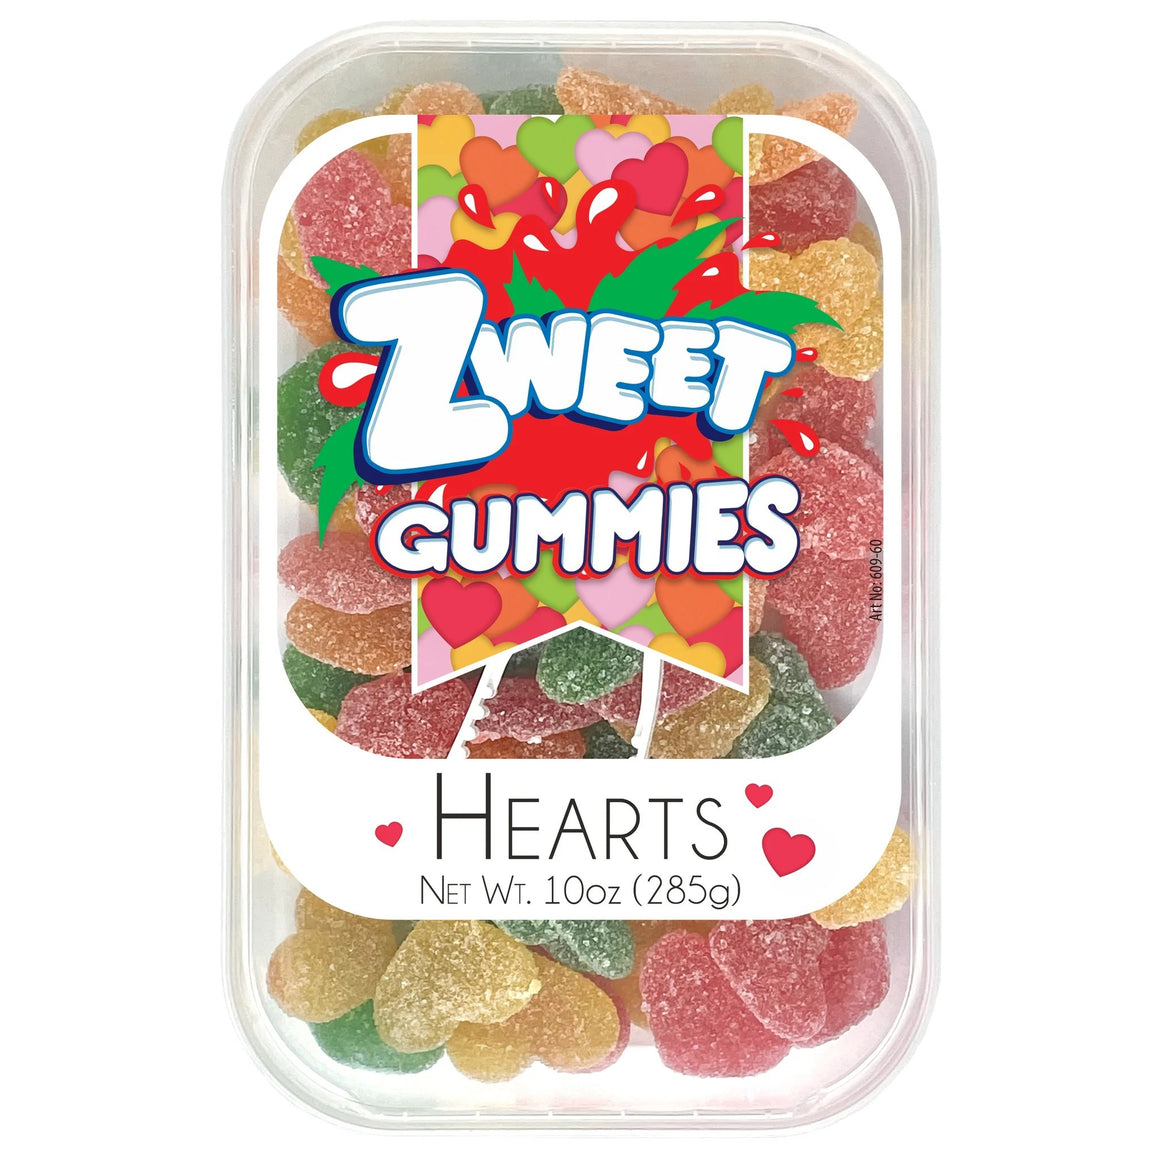 All City Candy Zweet Gummy Sour Hearts 10 oz. Tub Gummi Galil Foods For fresh candy and great service, visit www.allcitycandy.com